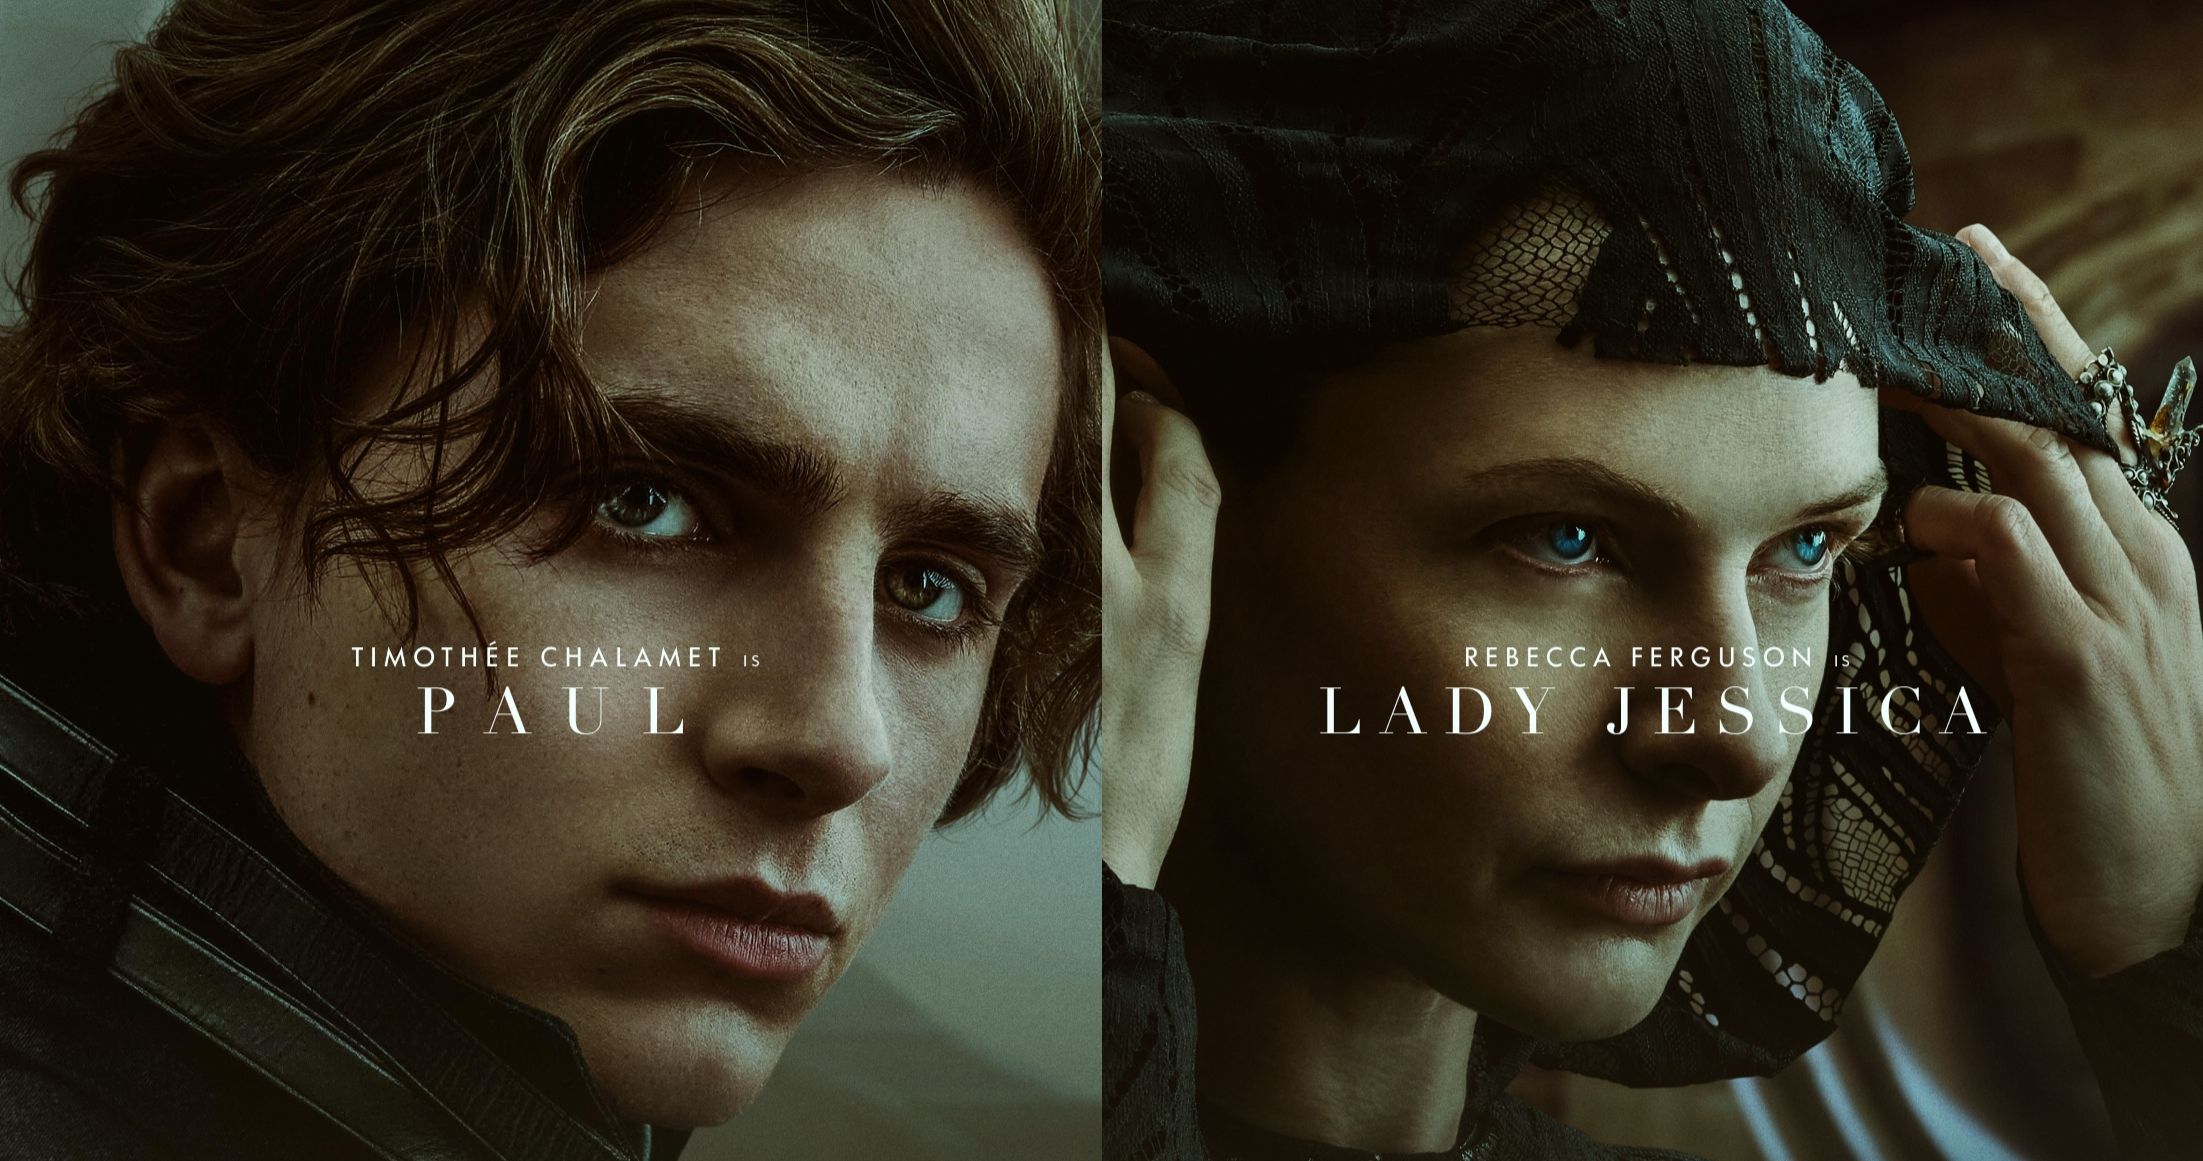 Dune Unleashes 8 Character Posters Showing Off the Look of the Upcoming Epic